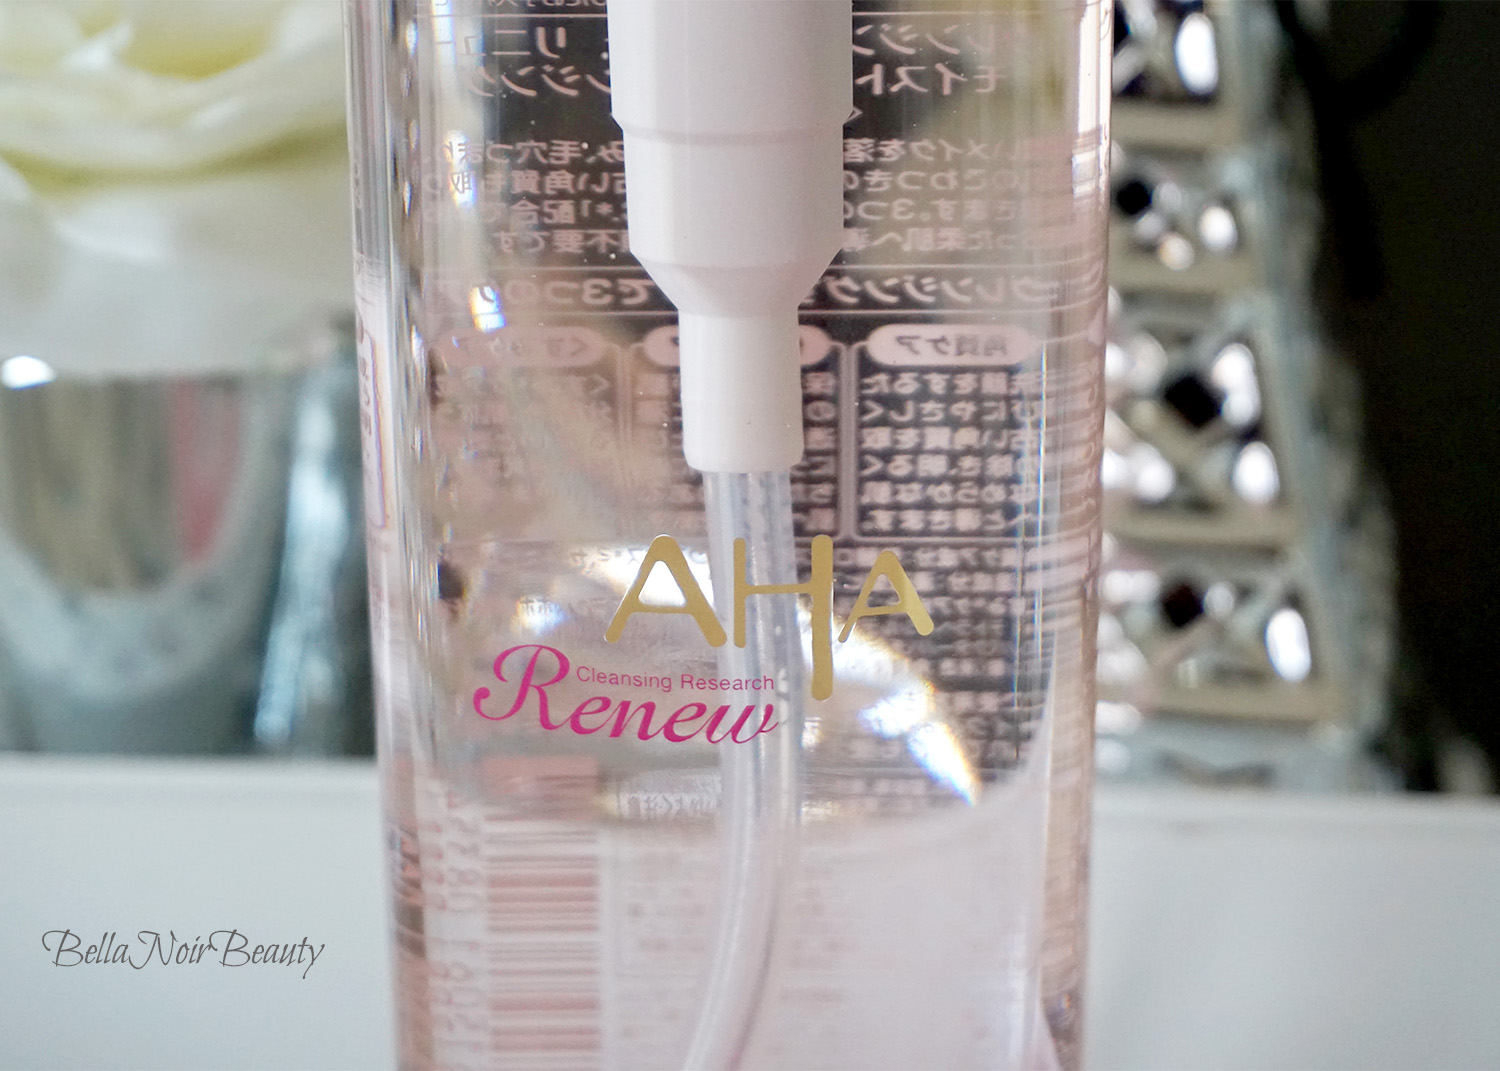 AHA Cleansing Research Renew Cleansing Oil | bellanoirbeauty.com